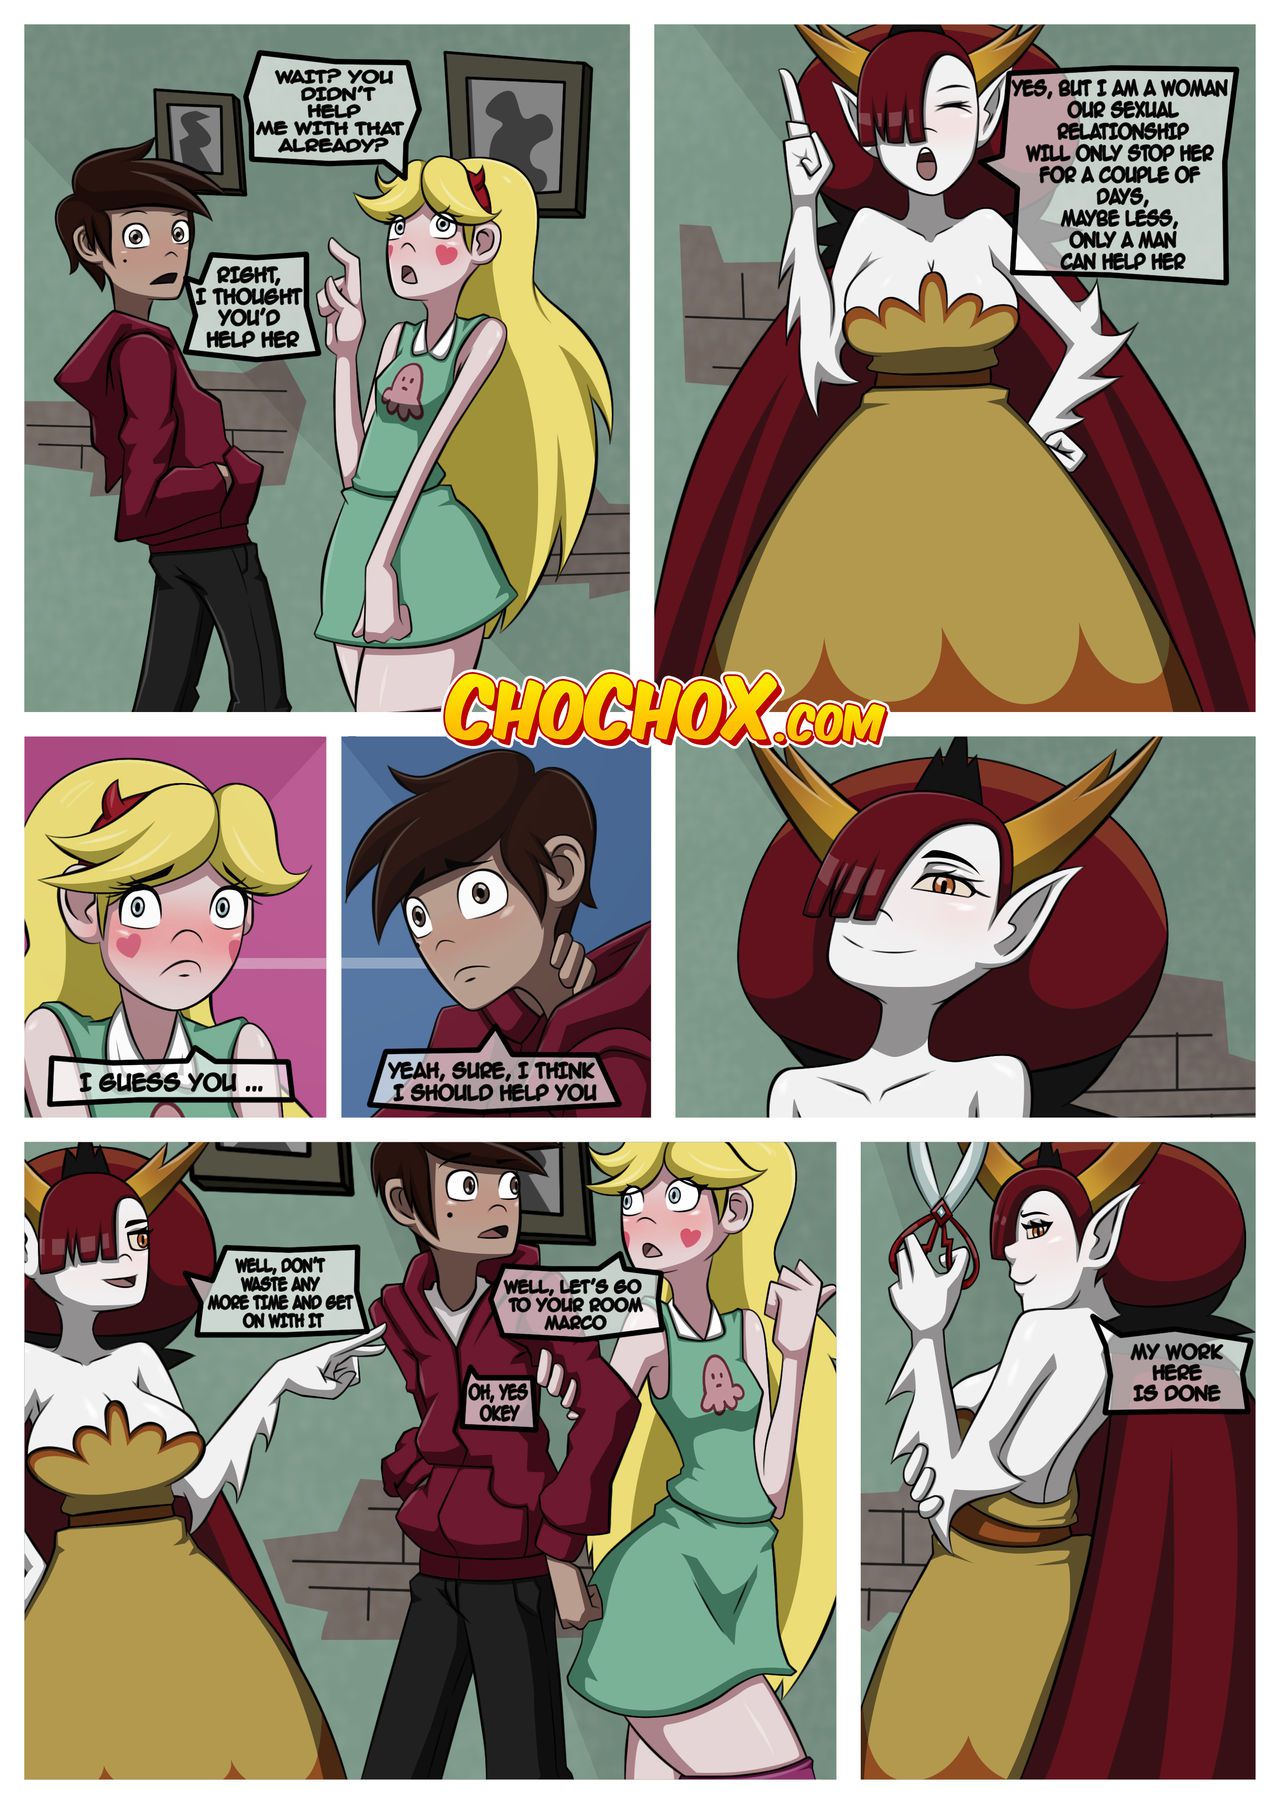 [Crock Comix] Hekapoo Plan’s - Sexberty 1 [ChoChoX] (Star Vs. The Forces of Evil) 13